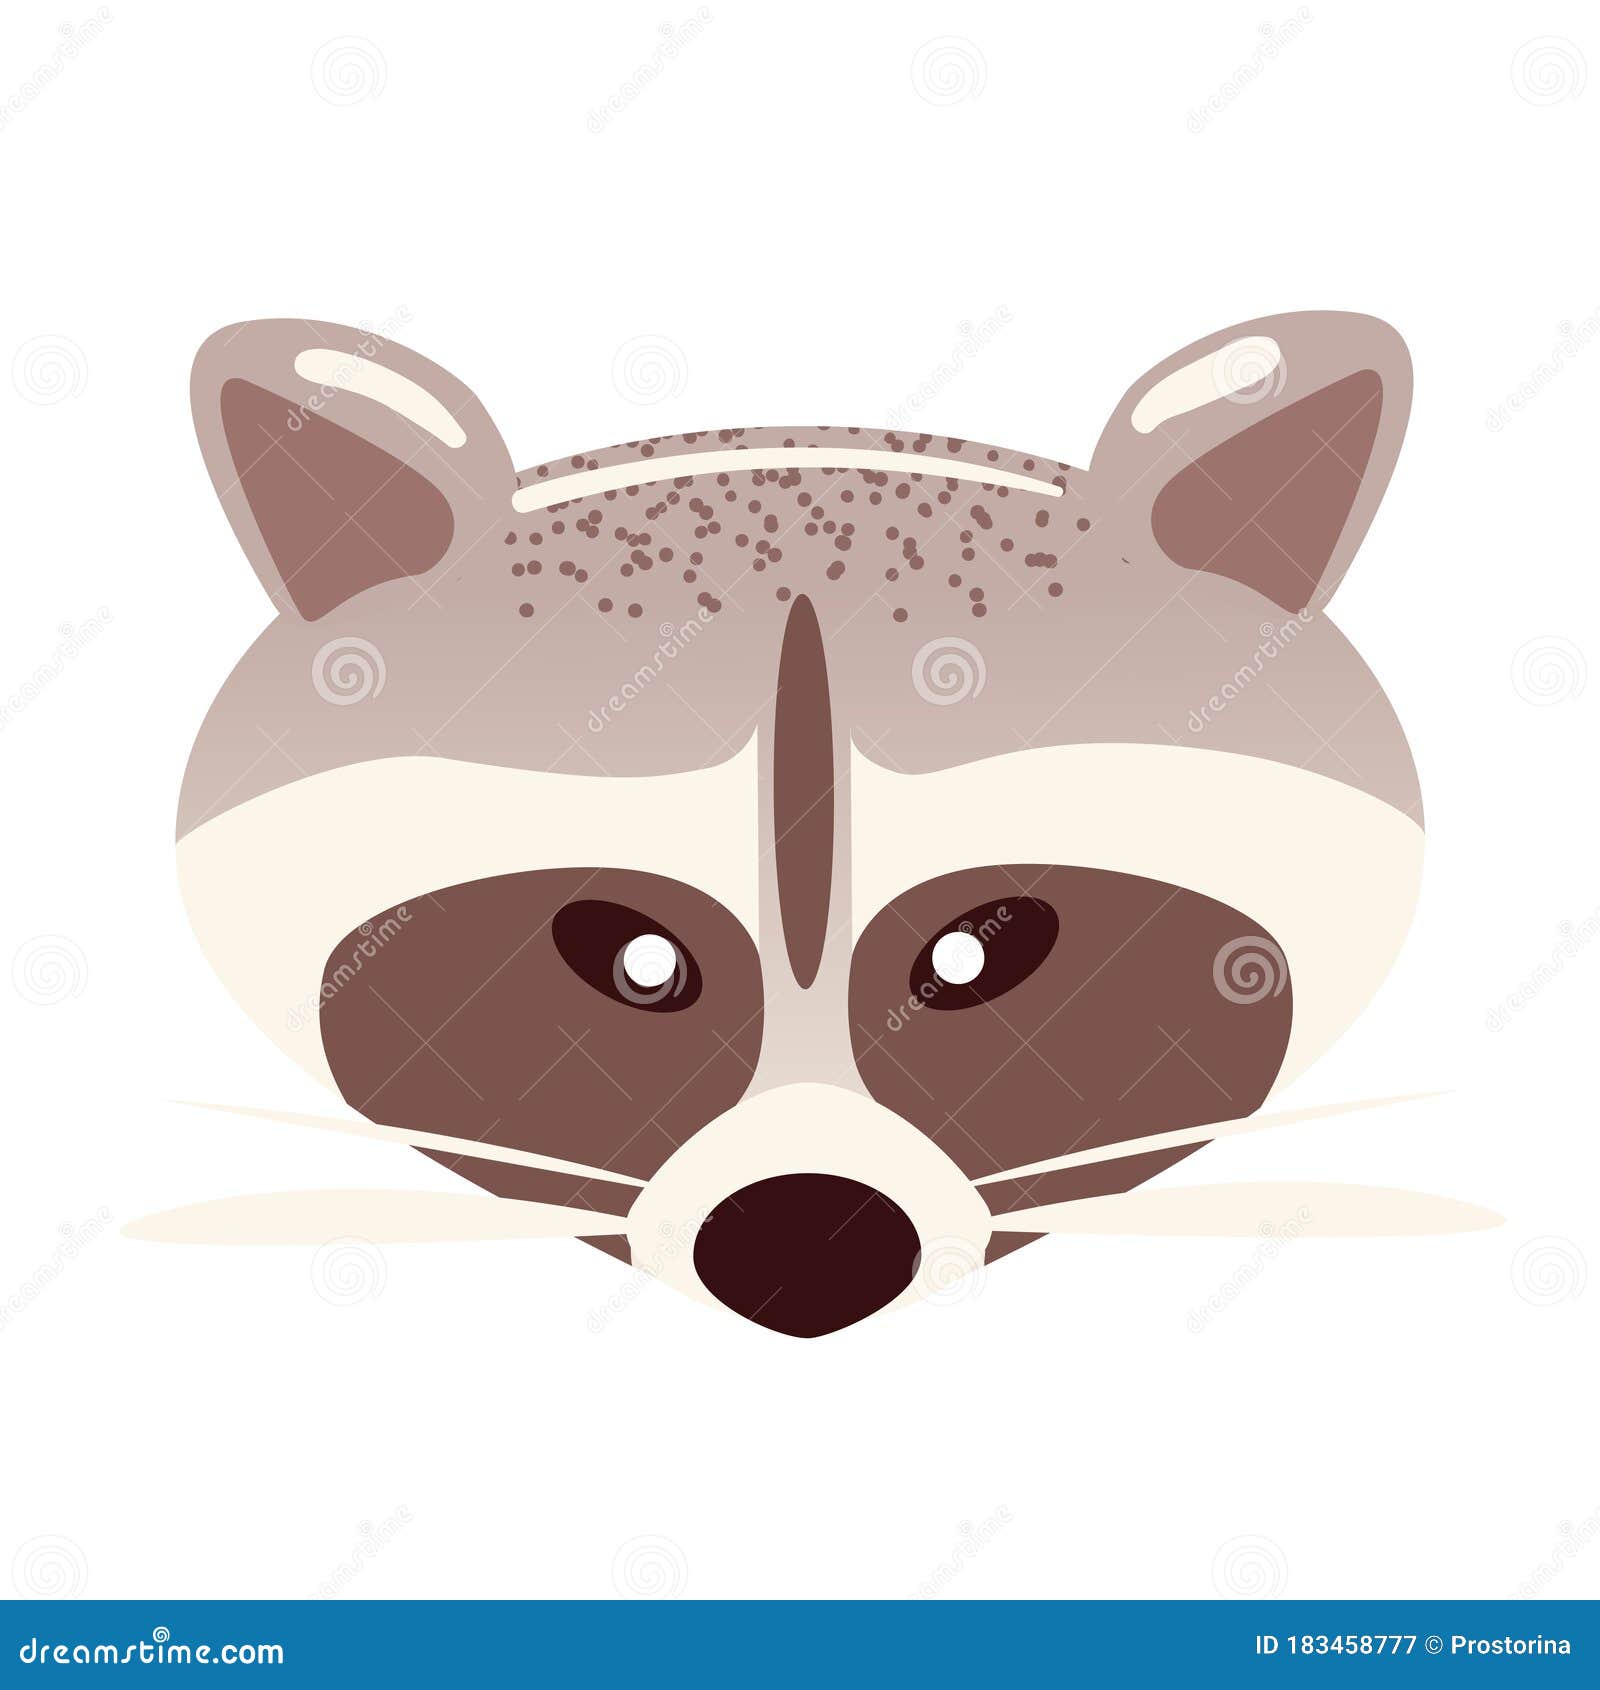 Cartoon Raccoon Face in Flat Style on White Background. Animal Character  Sticker Stock Vector - Illustration of character, animal: 183458777